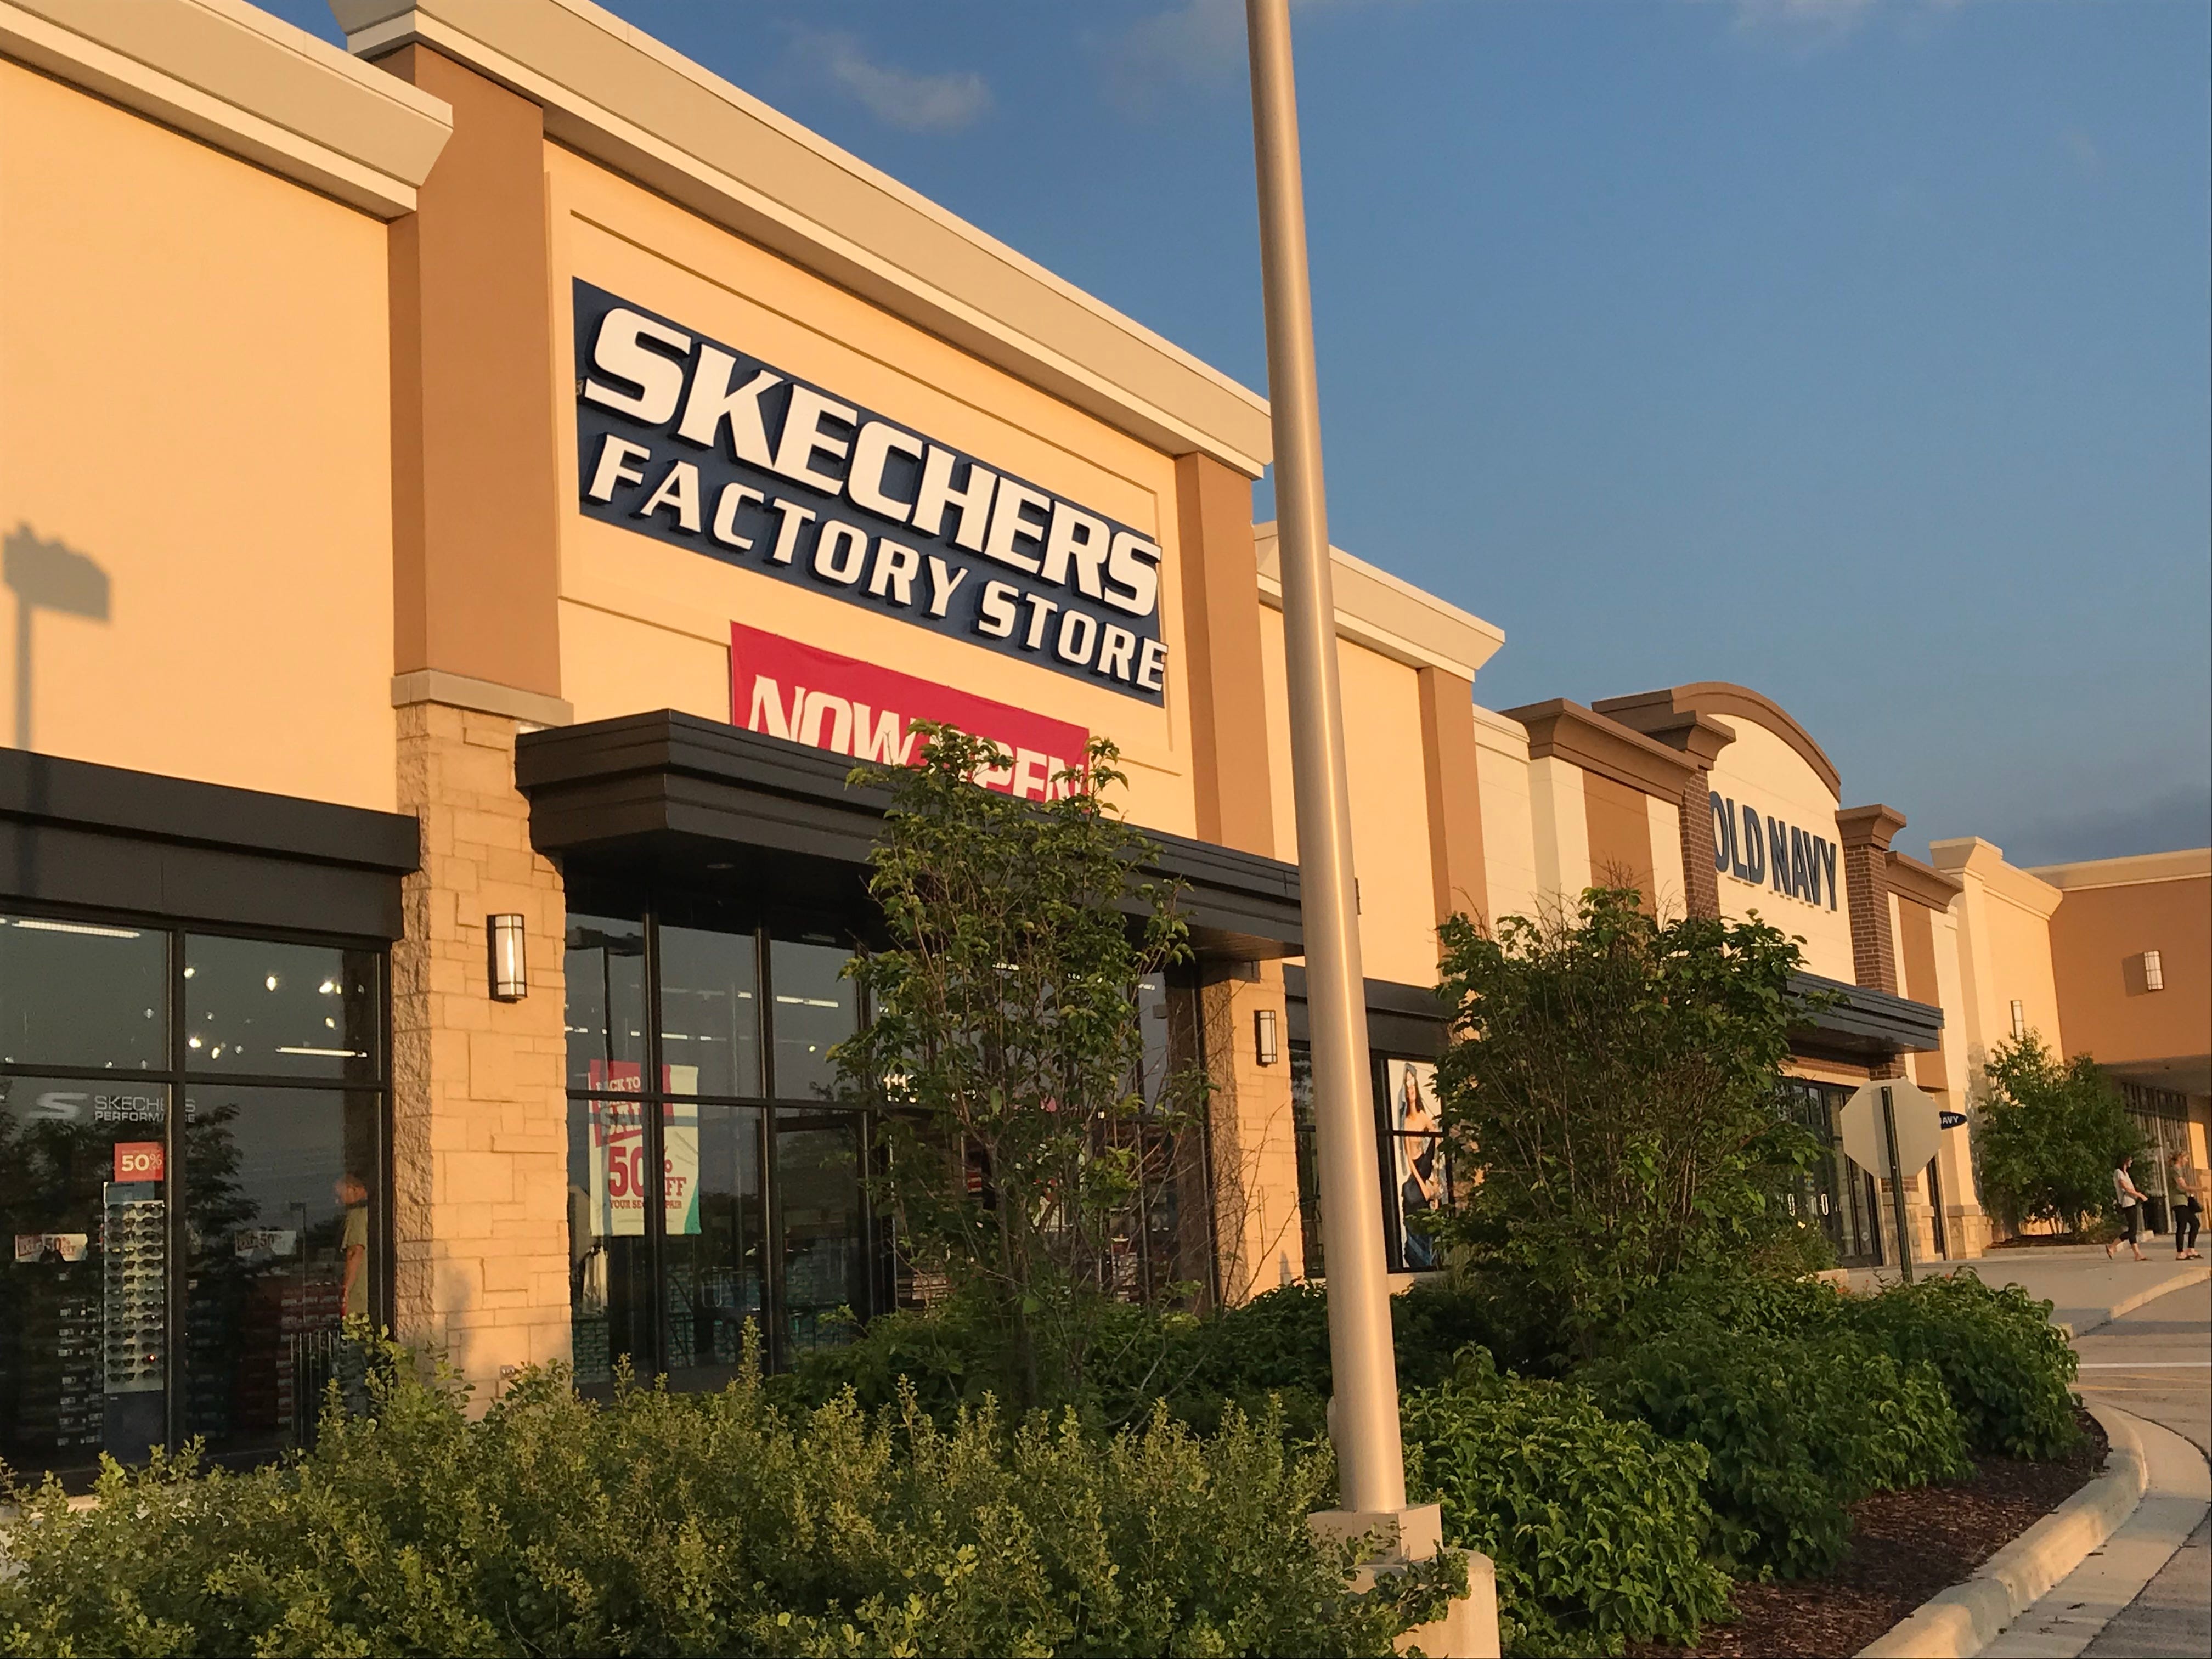 Skechers warehouse store is coming to 